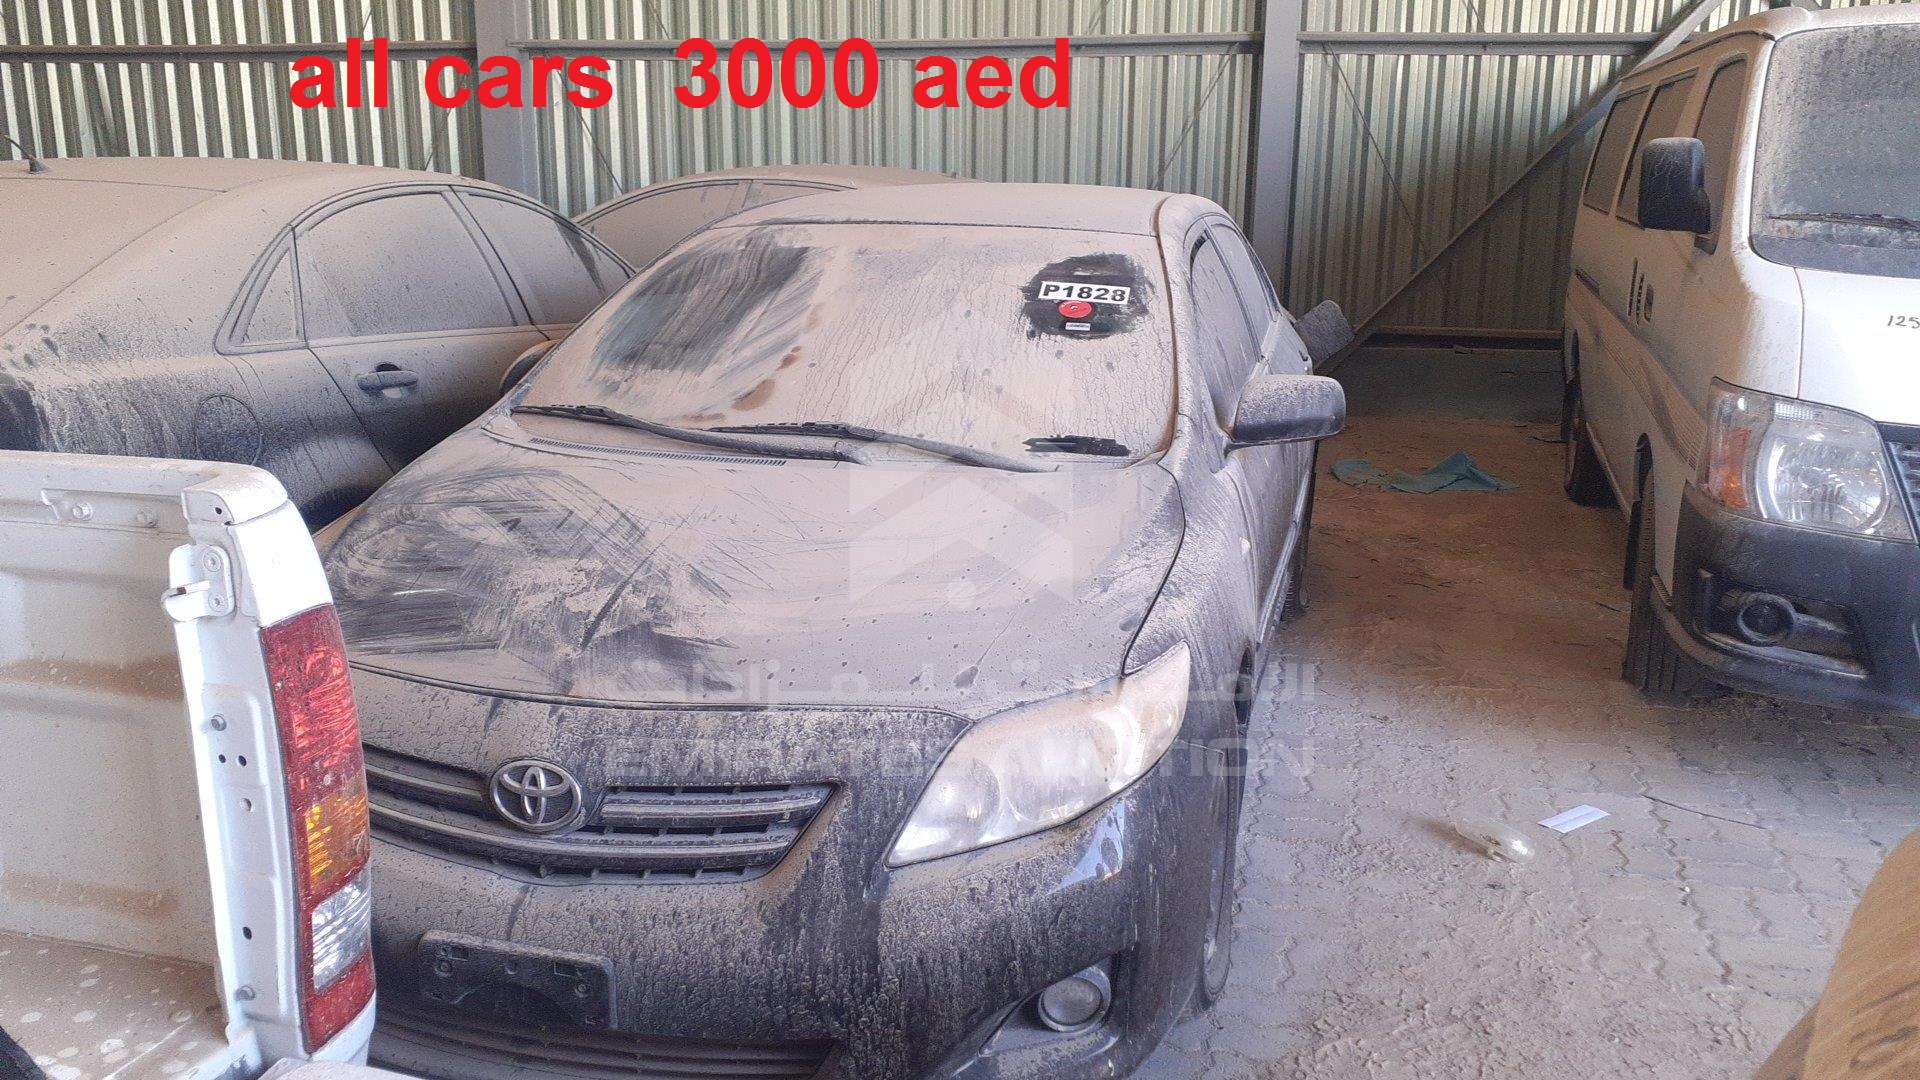 corolla cars price from 3000 aed and above